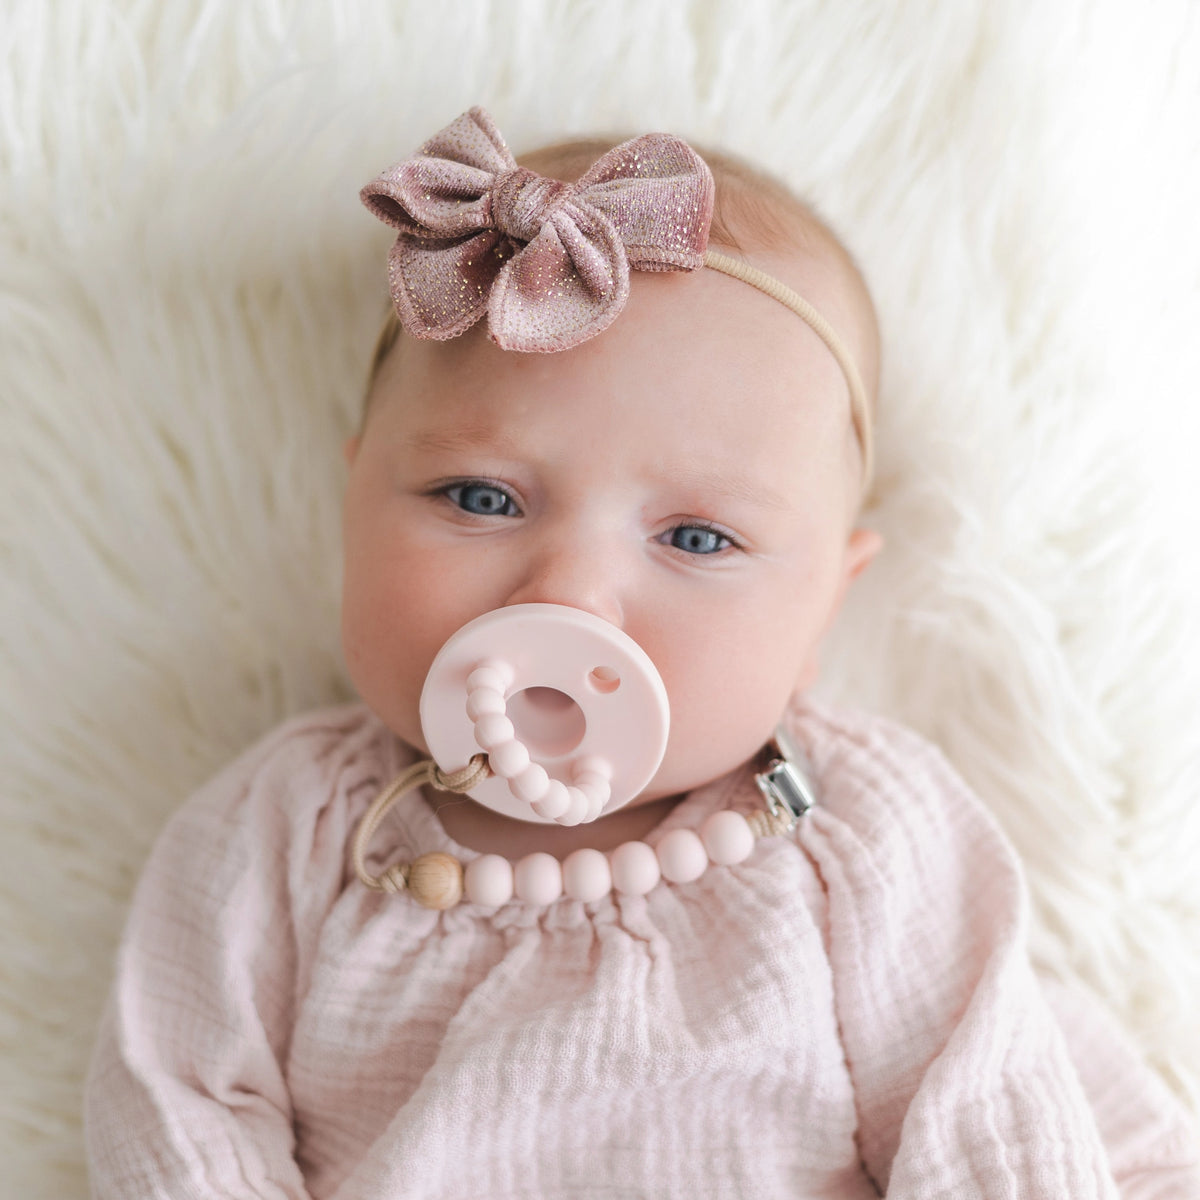 Pink Cutie PAT Round (Pacifier + Teether)